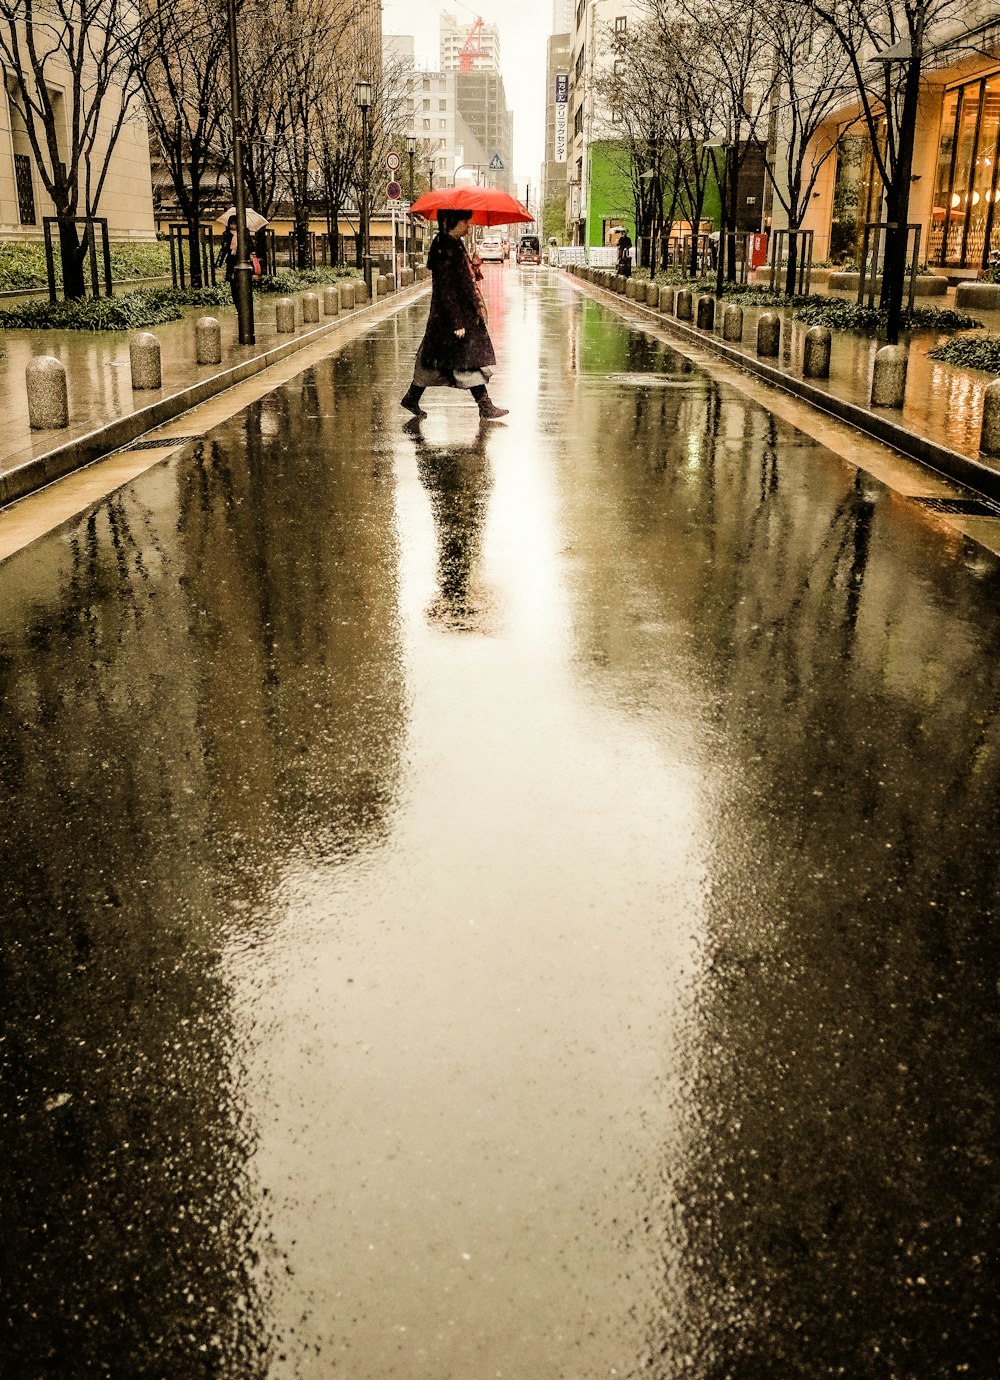 person in red jacket walking on wet road during daytime